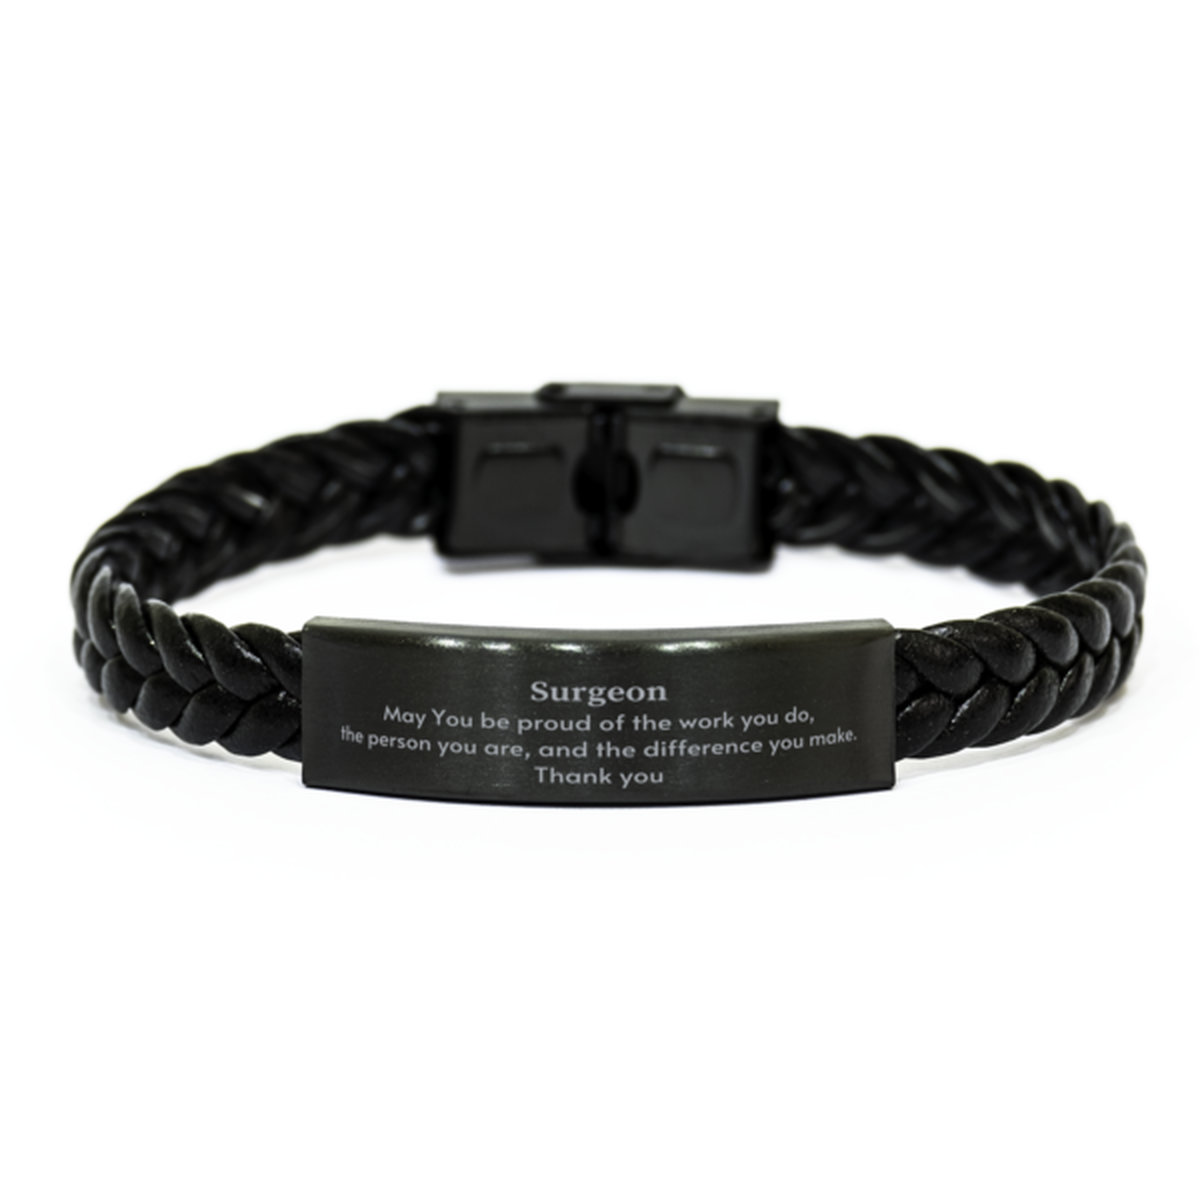 Heartwarming Braided Leather Bracelet Retirement Coworkers Gifts for Surgeon, Surgeon May You be proud of the work you do, the person you are Gifts for Boss Men Women Friends